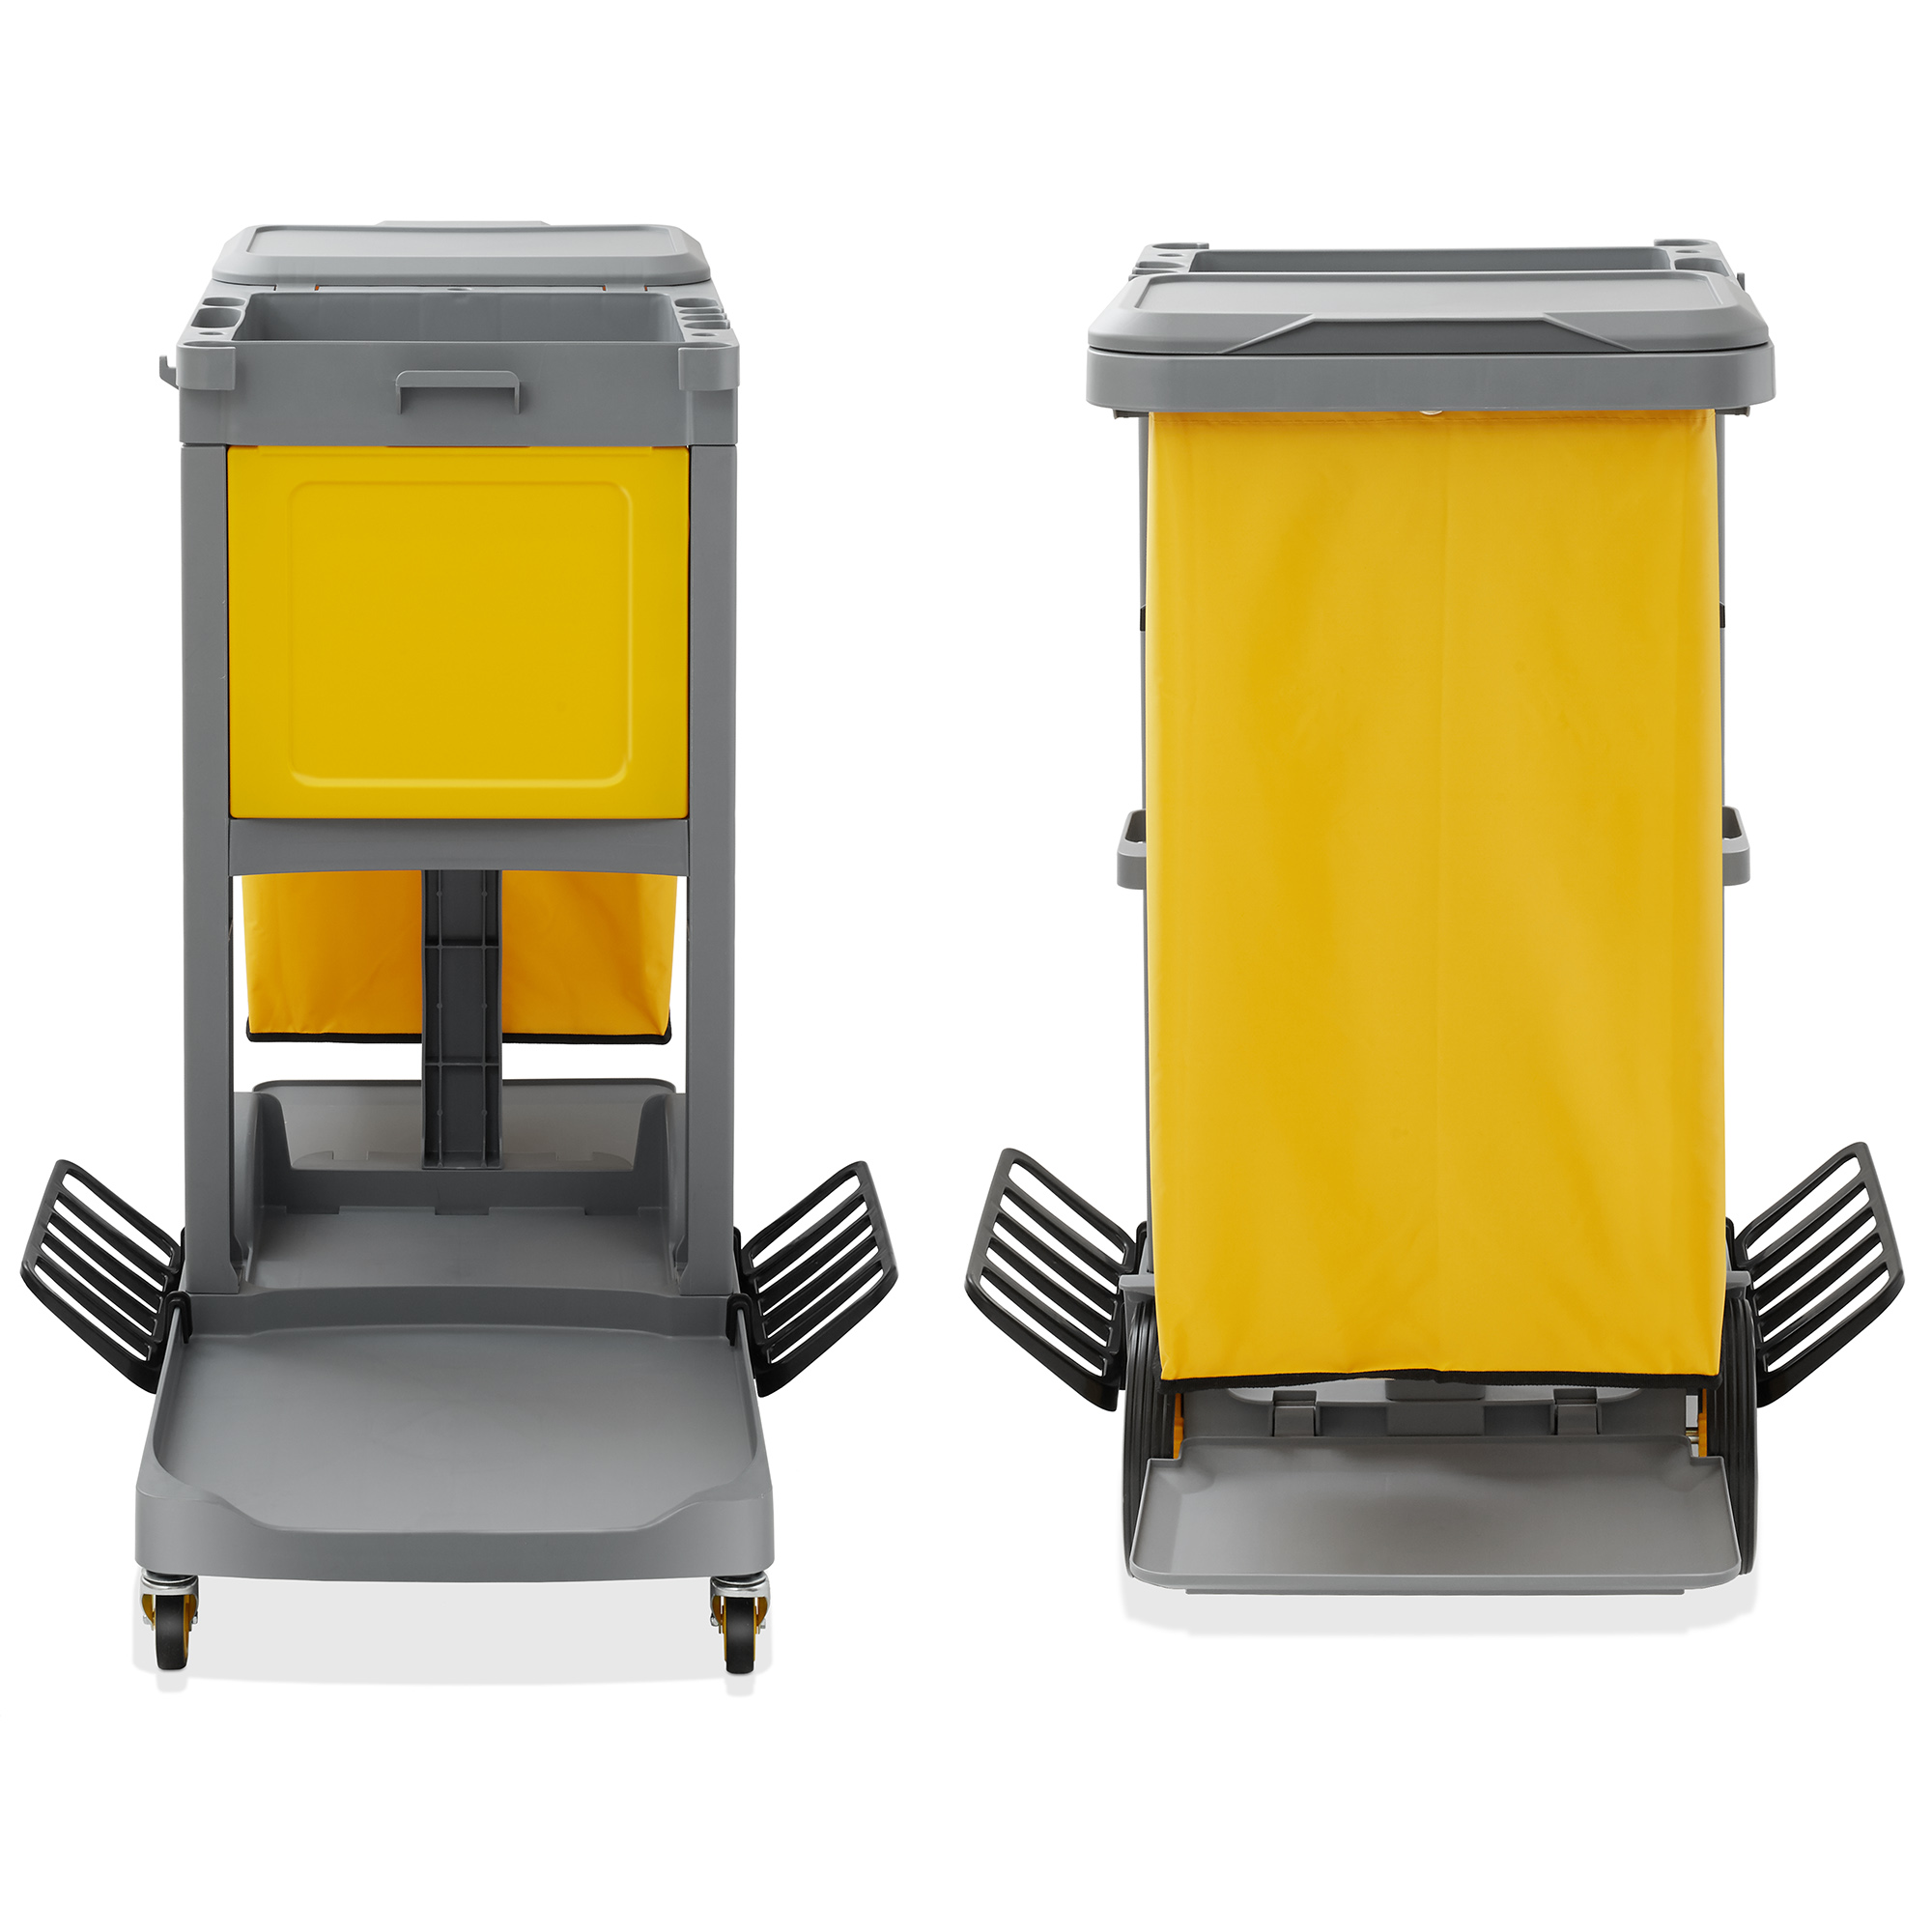 Dryser Commercial Janitorial Cleaning Cart Caddy on Wheels with Key-Locking Cabinet